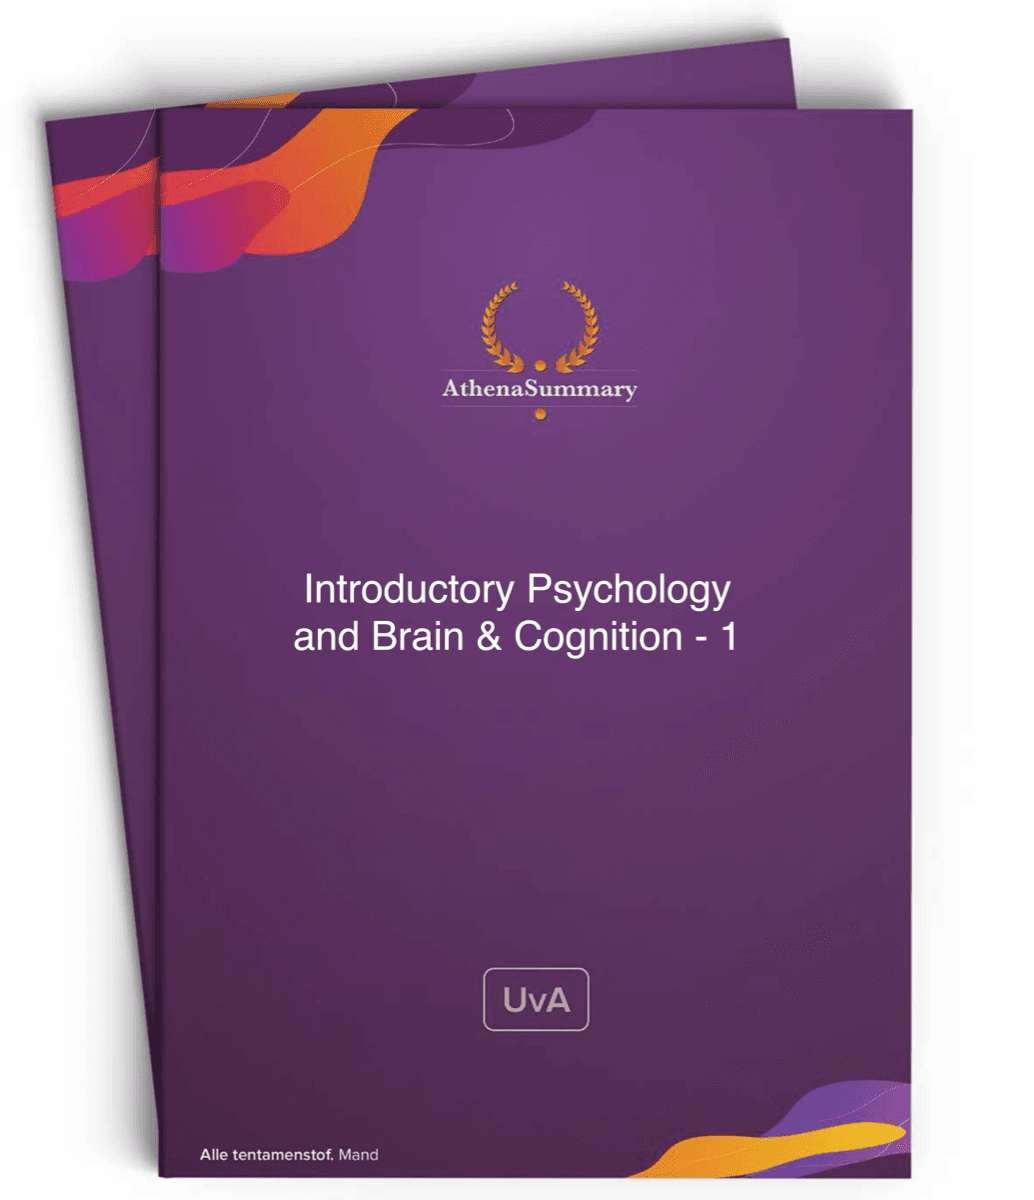 Literature Summary: Introductory Psychology and Brain & Cognition - 1